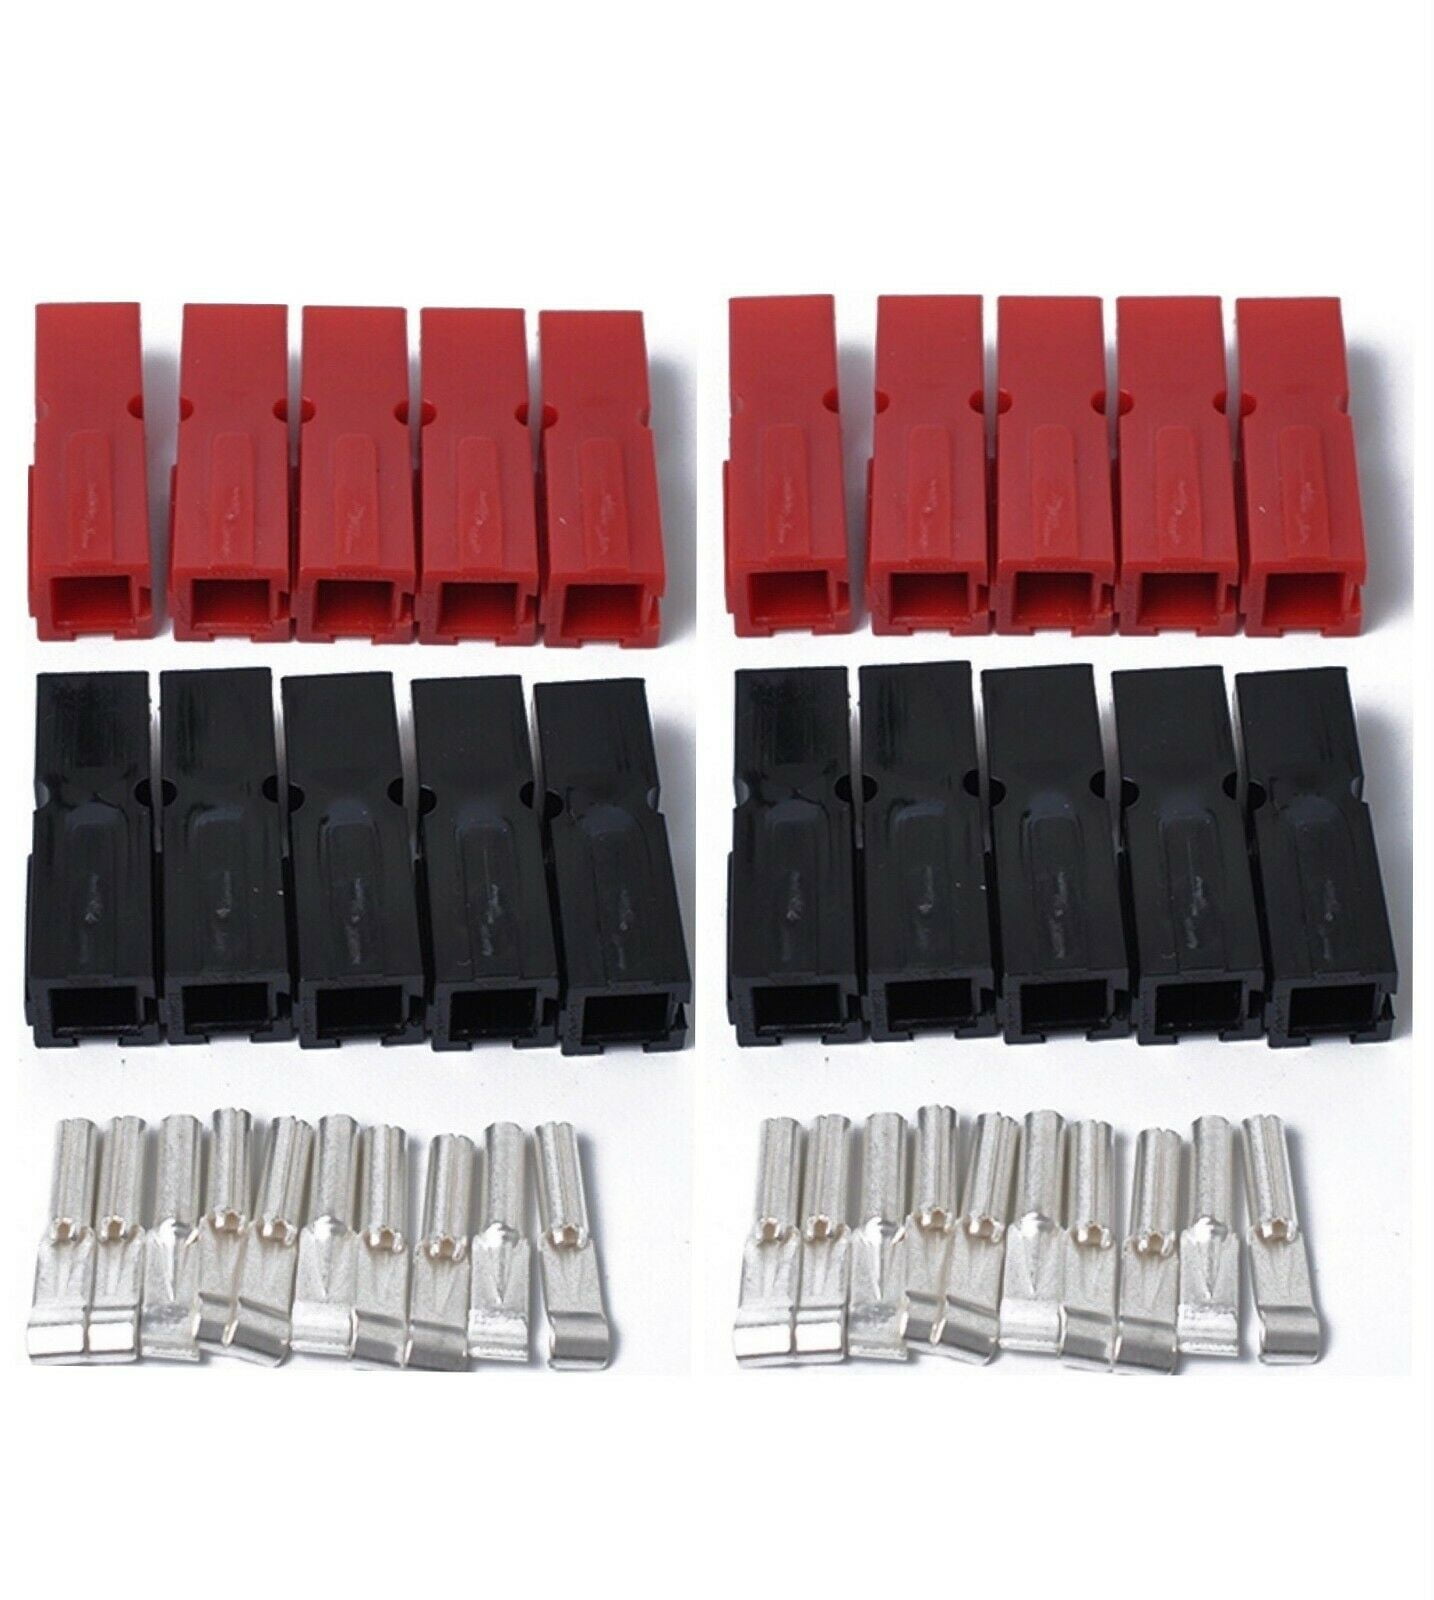 Red & Black Housings Anderson Powerpole Connector 50 Pack 30 Amp Contacts 